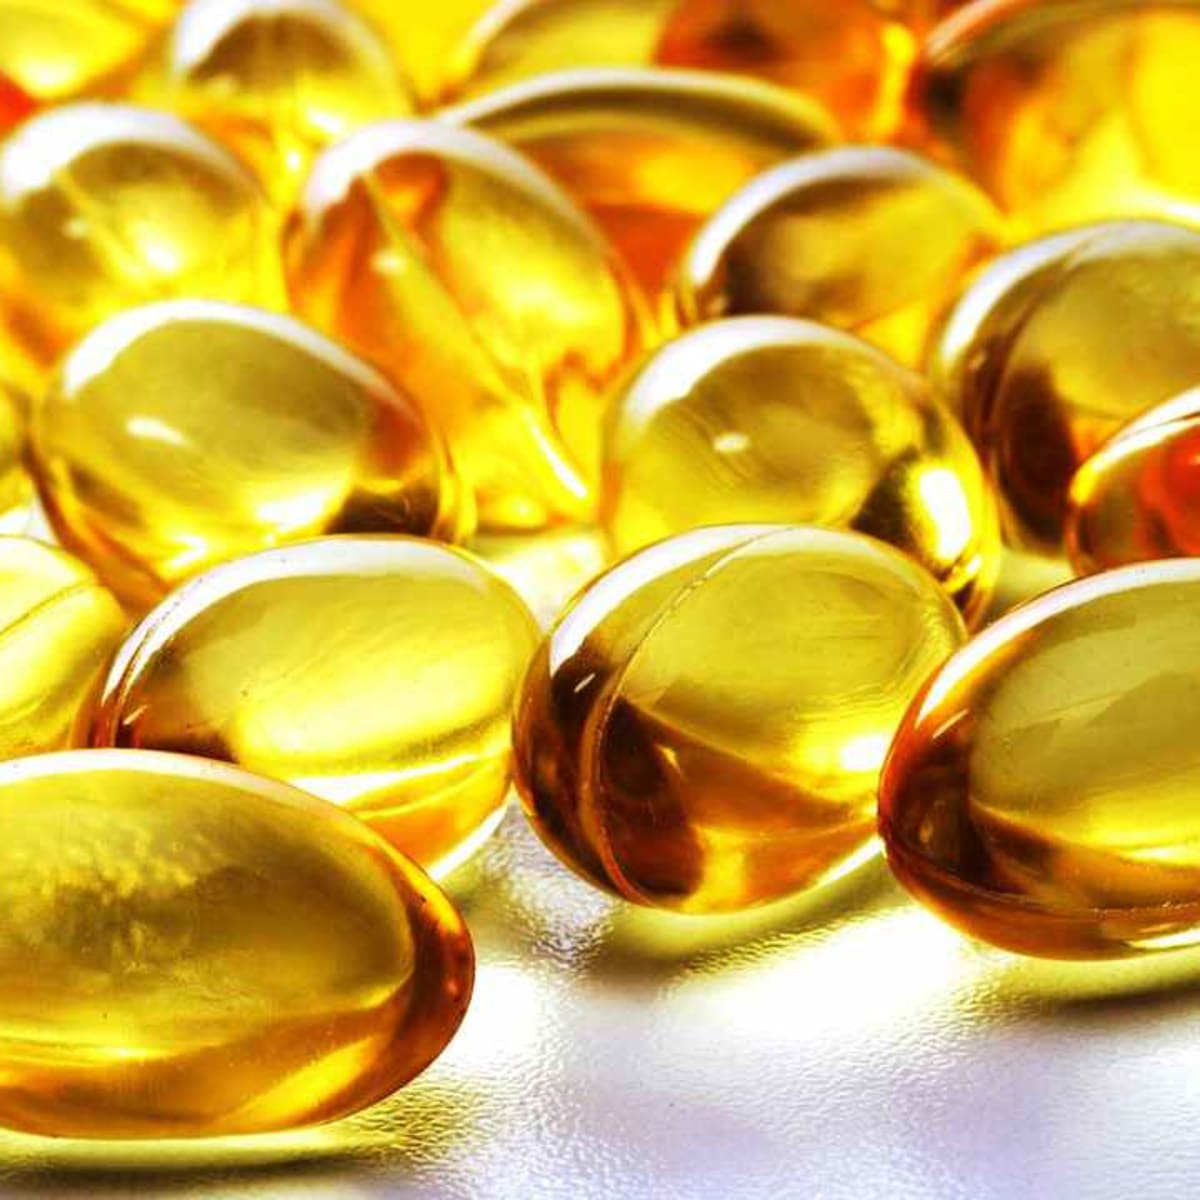 How To Use Vitamin E Capsules On Your Skin Howcast use vitamin e capsules on your skin